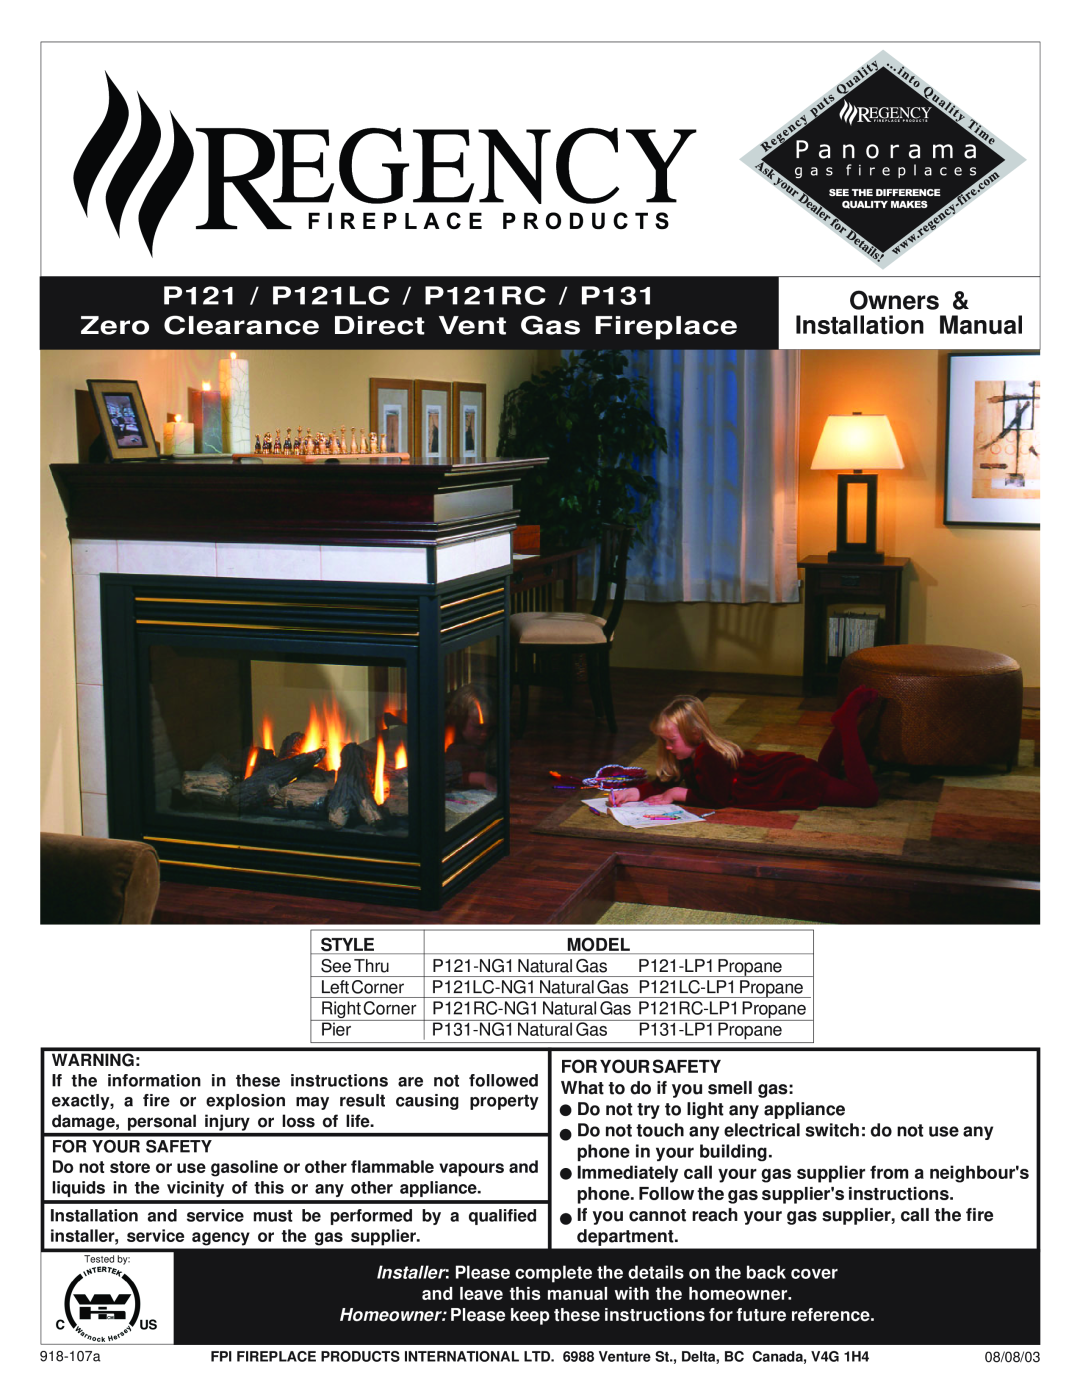 Regency installation manual P121 / P121LC / P121RC / P131, Zero Clearance Direct Vent Gas Fireplace, Style, Model 